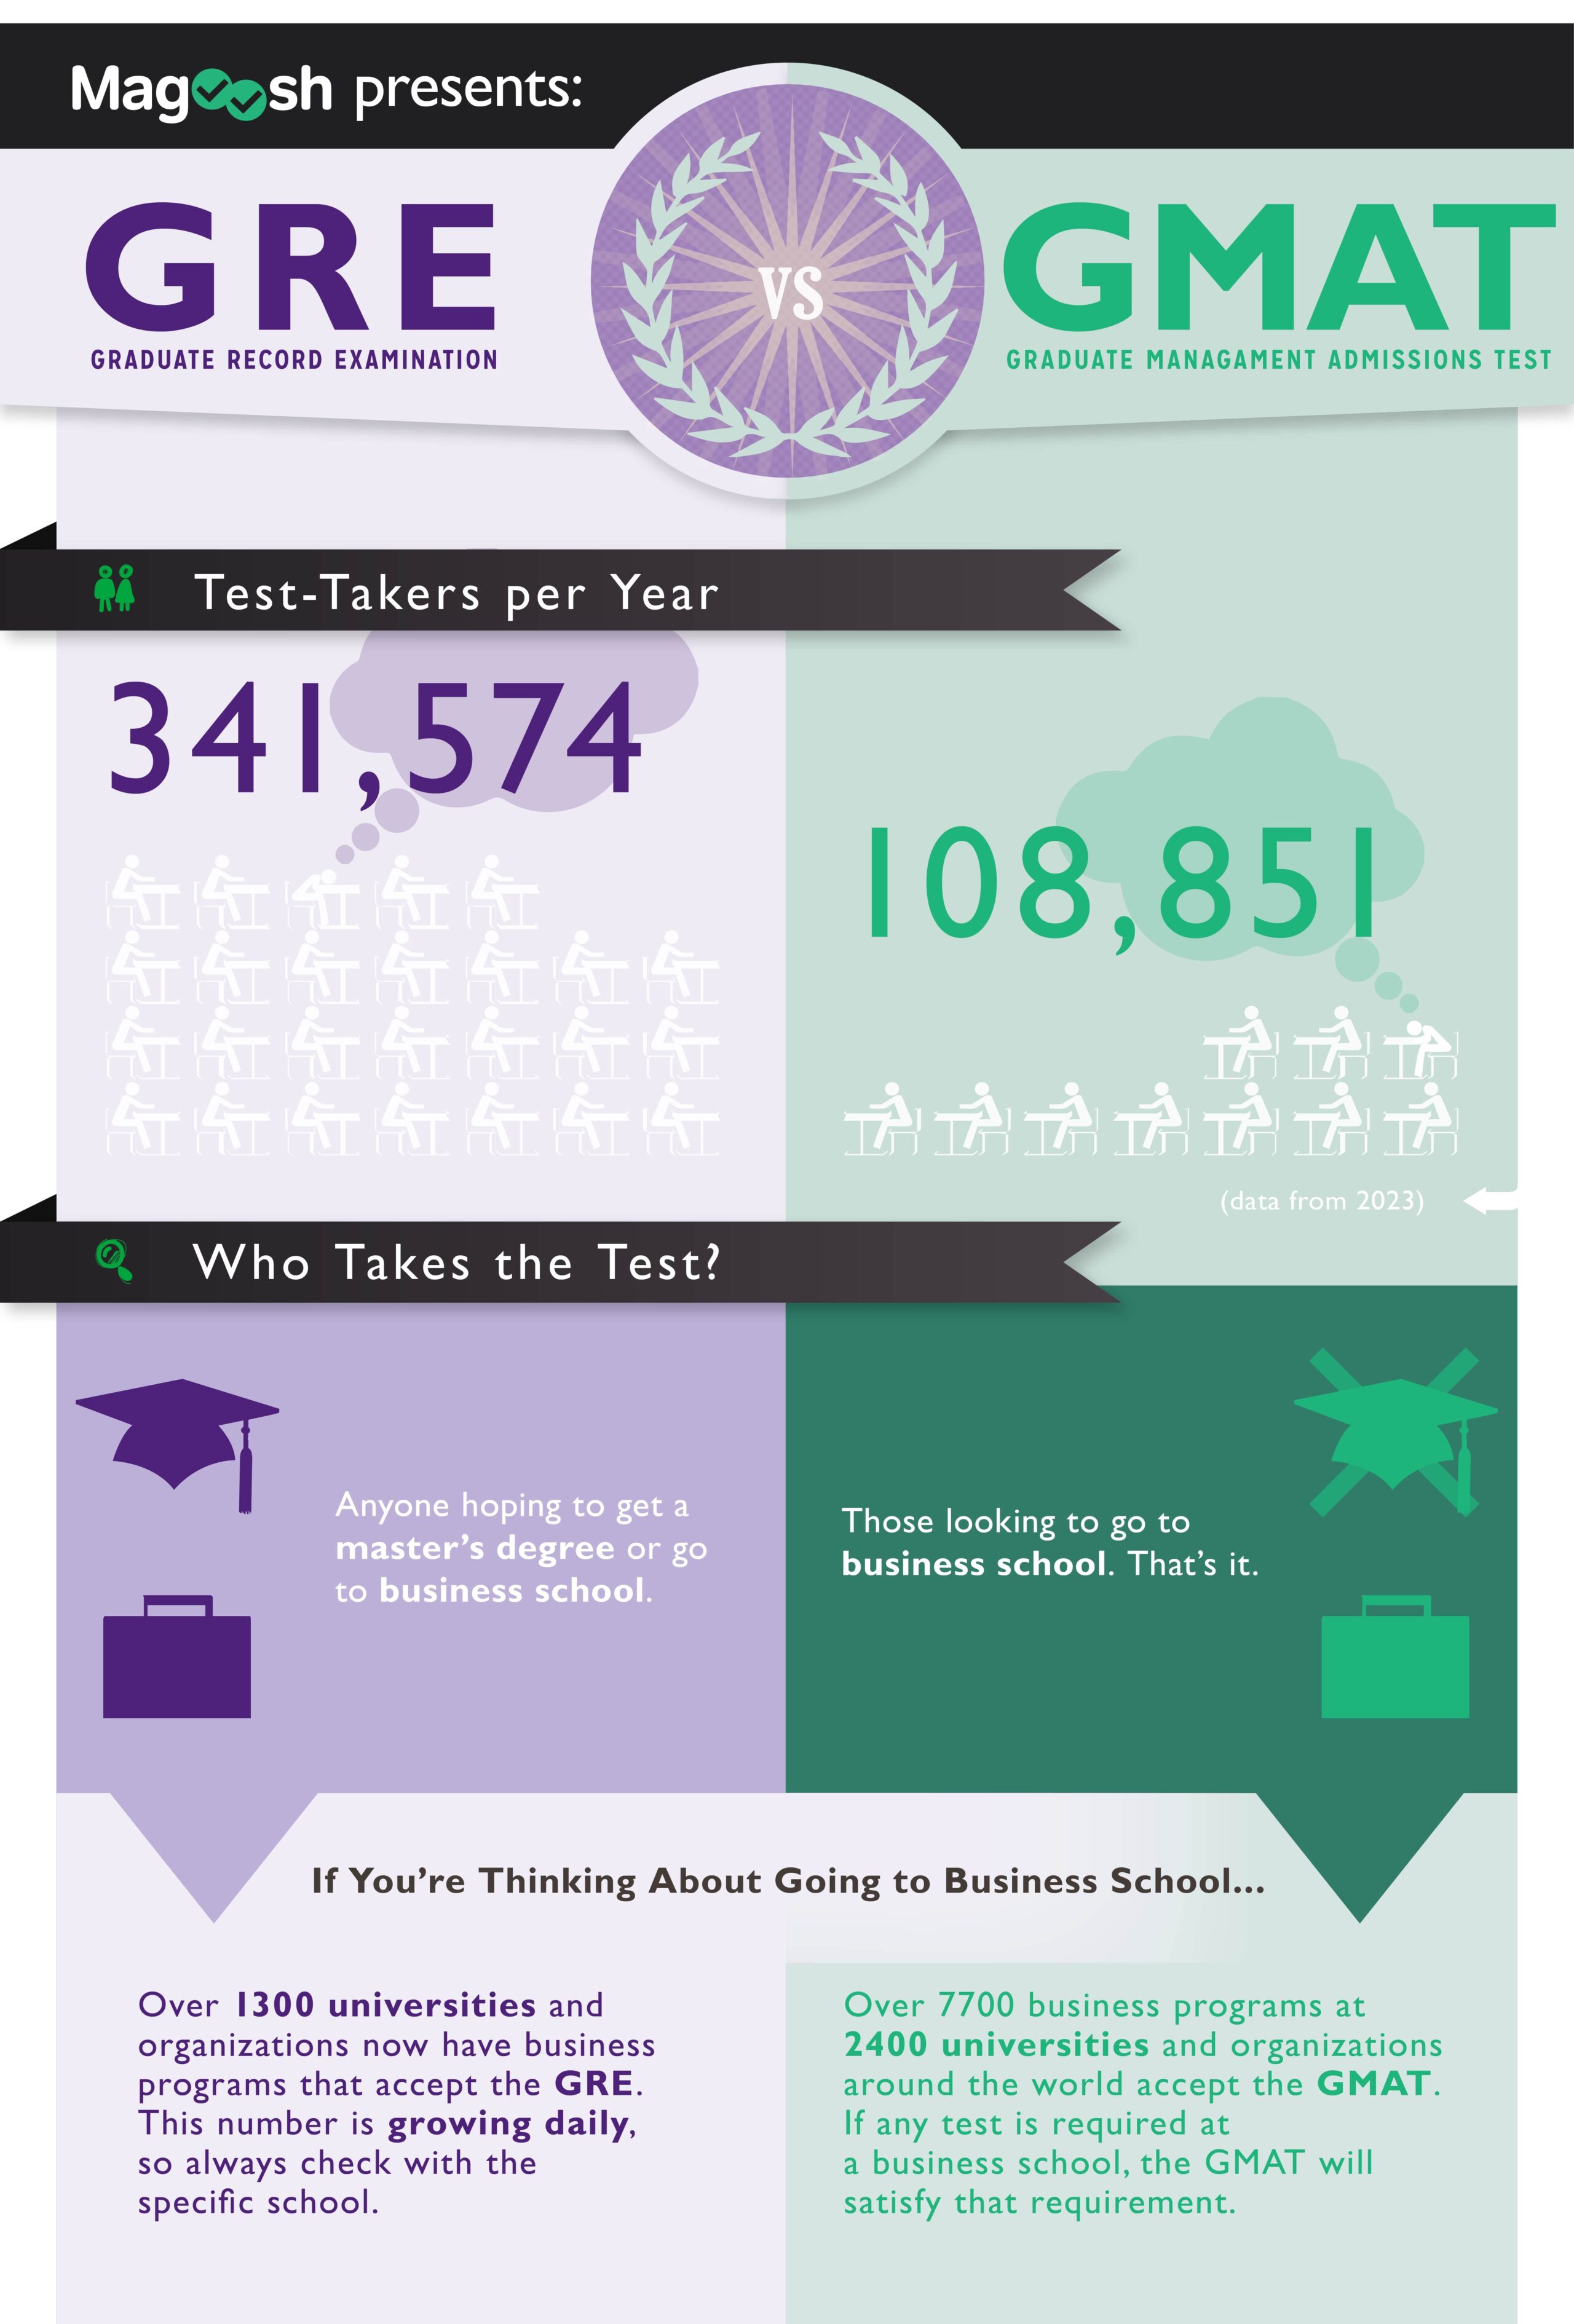 GMAT vs. GRE test-takers - infographic by Magoosh